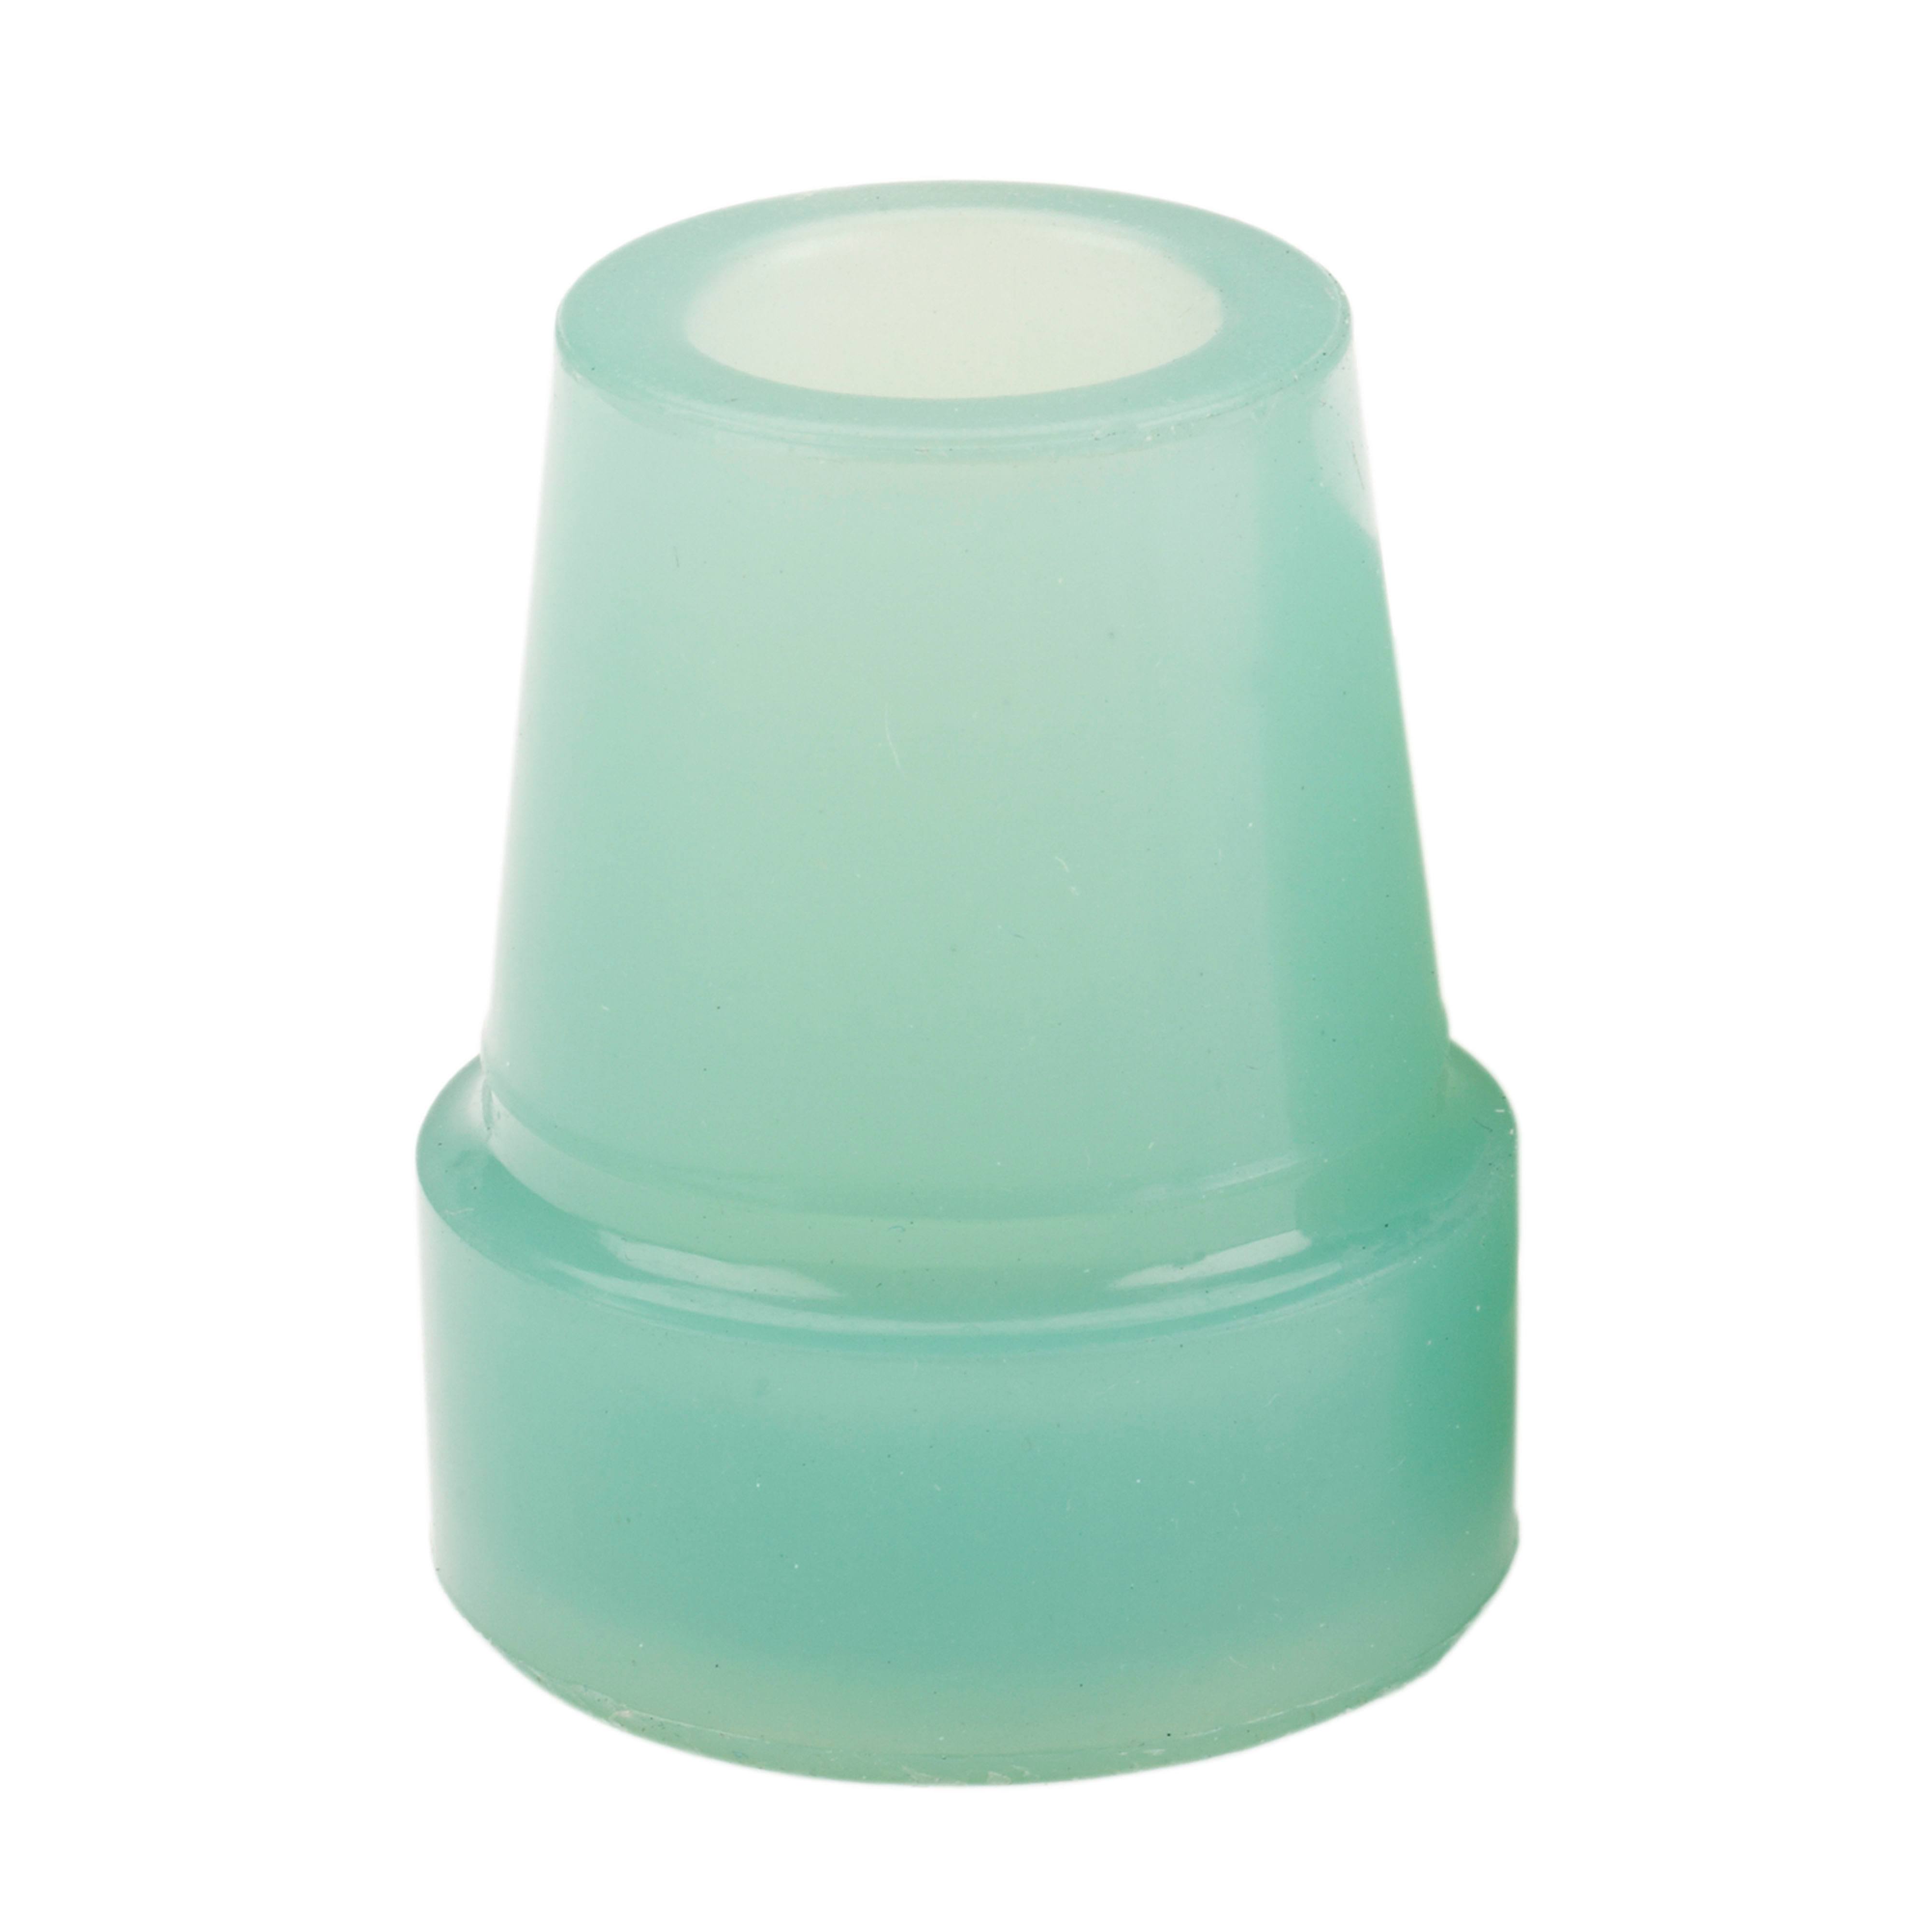 Drive Medical Glow in the Dark Cane Tip - Blue, 3/4"